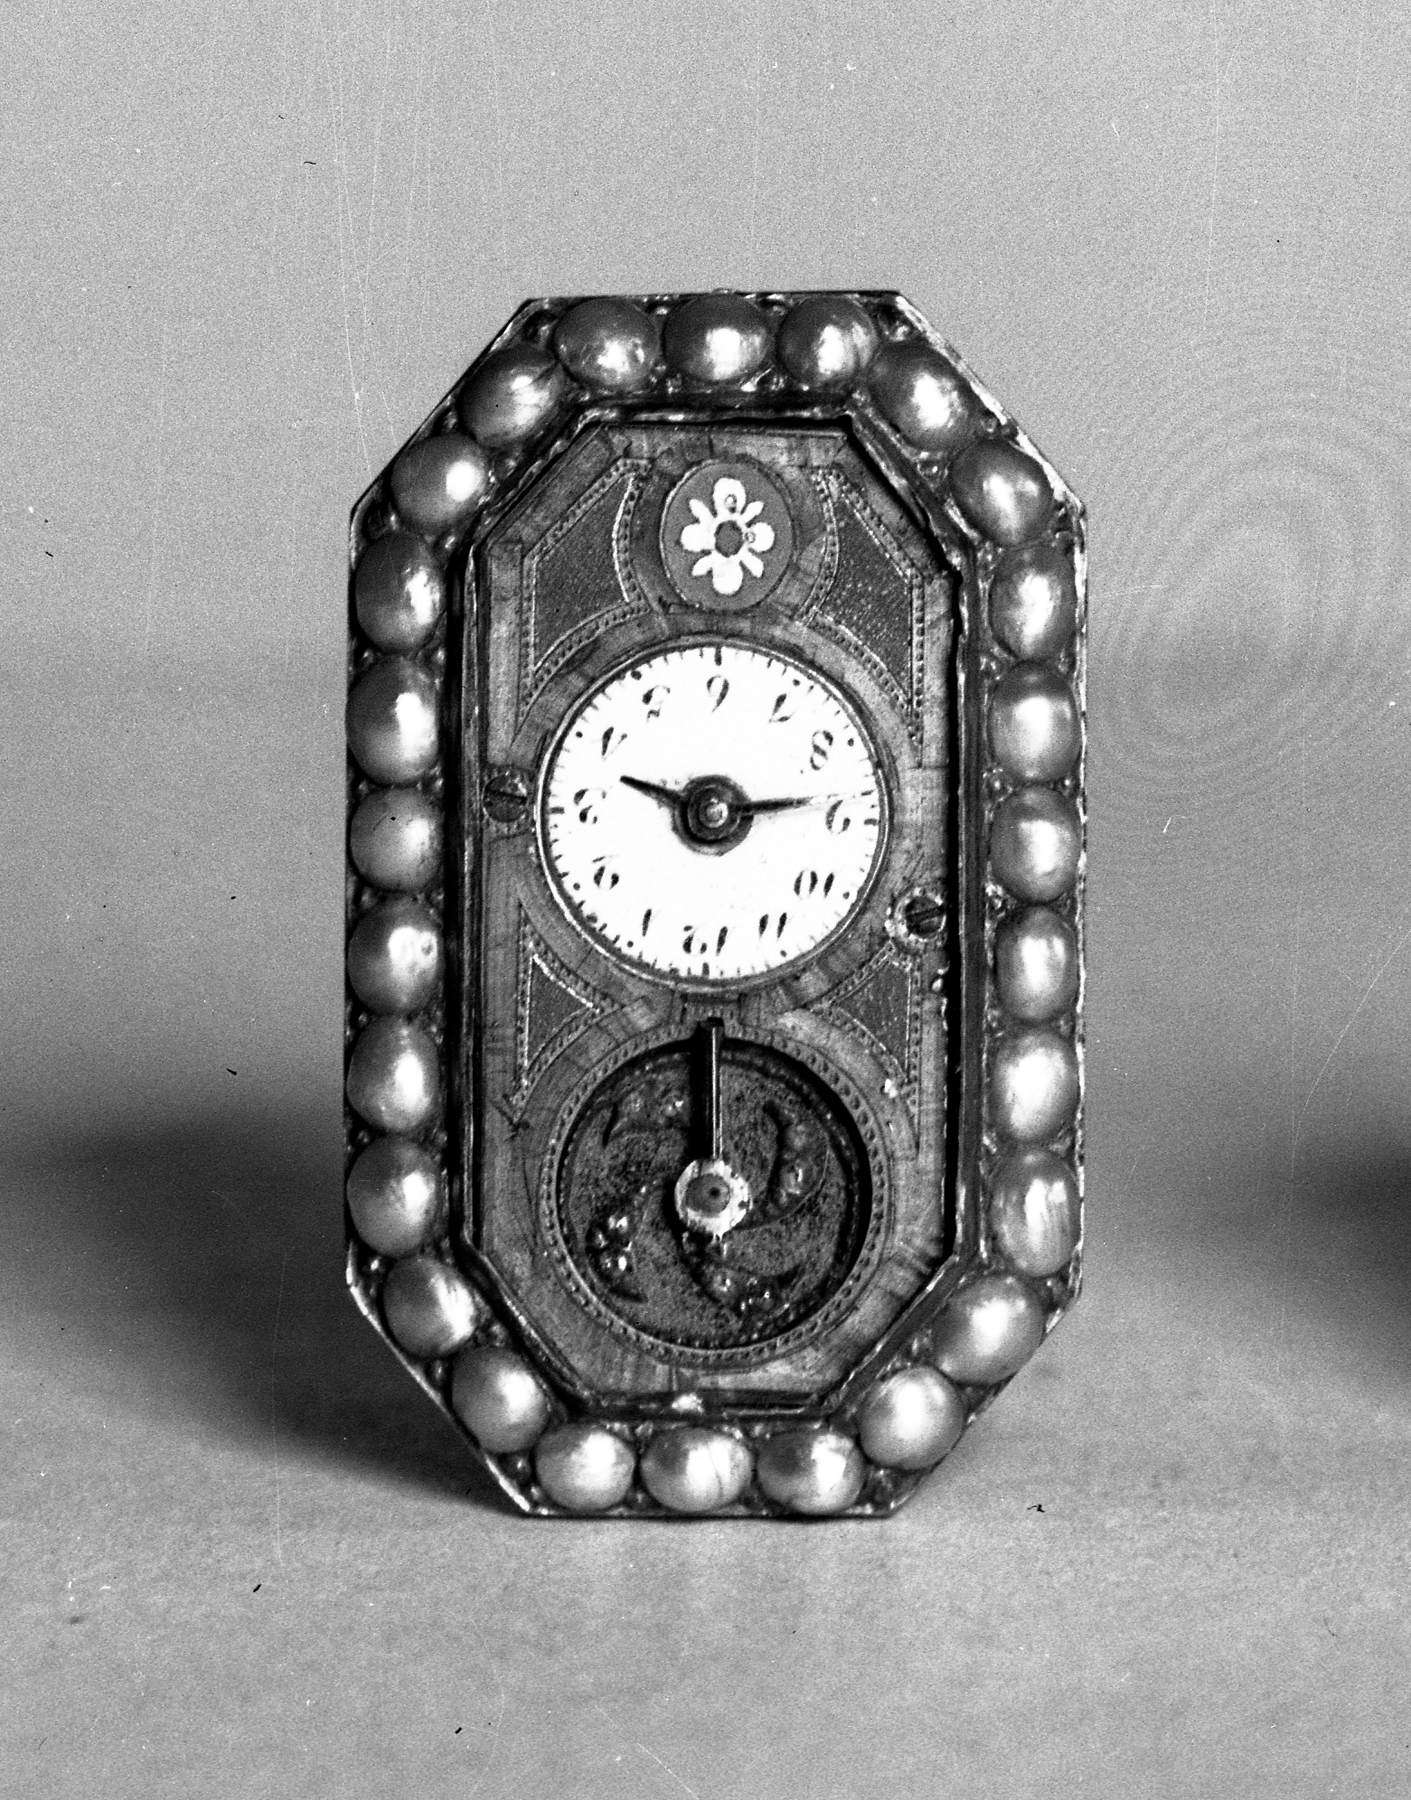 Image for Watch set in face of a brooch